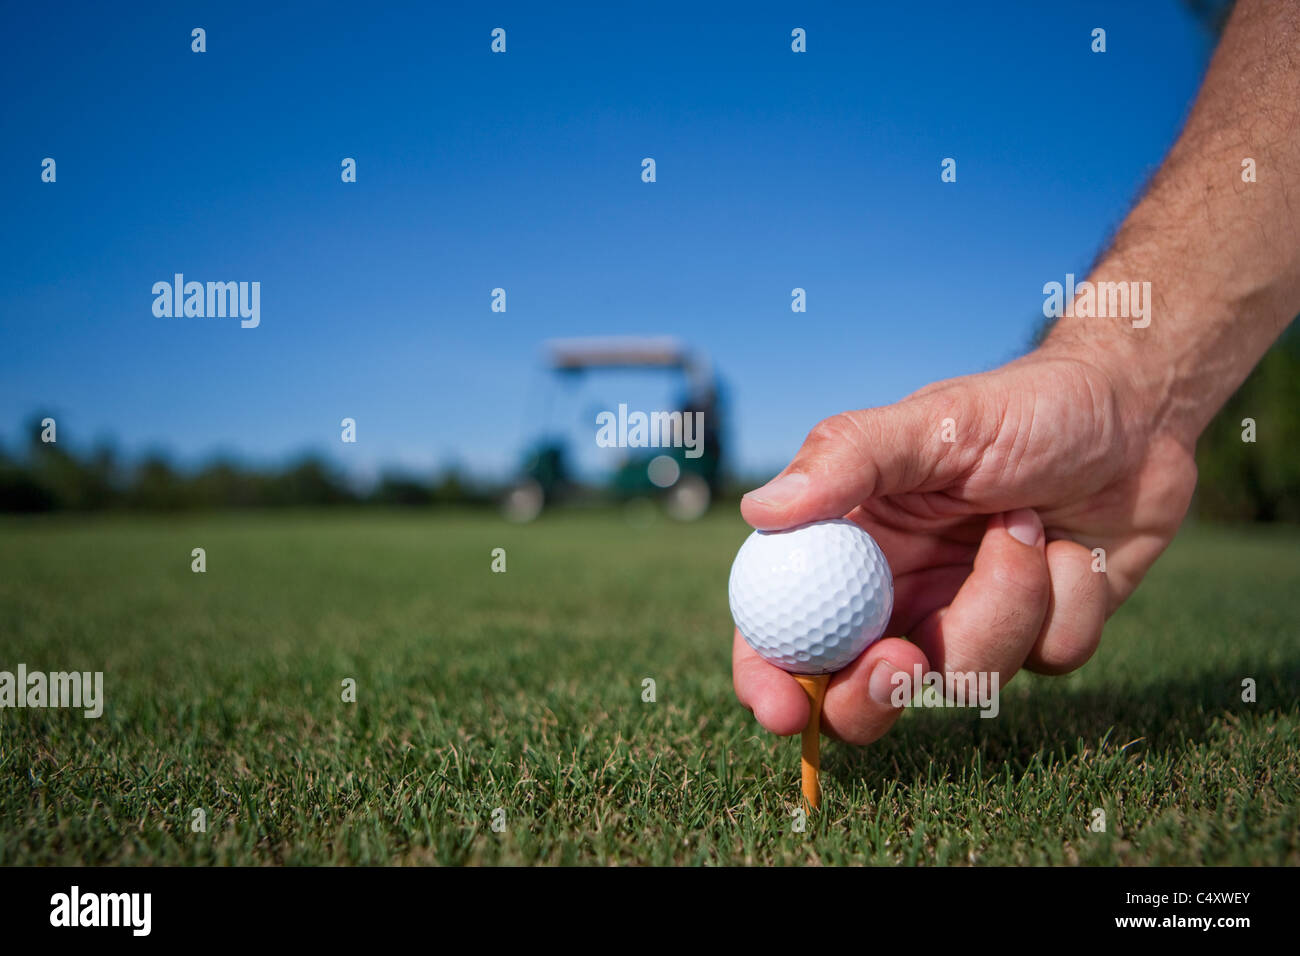 Placing a golf ball on the golf course on a summer's day with a golf cart blurred in the distance Stock Photo